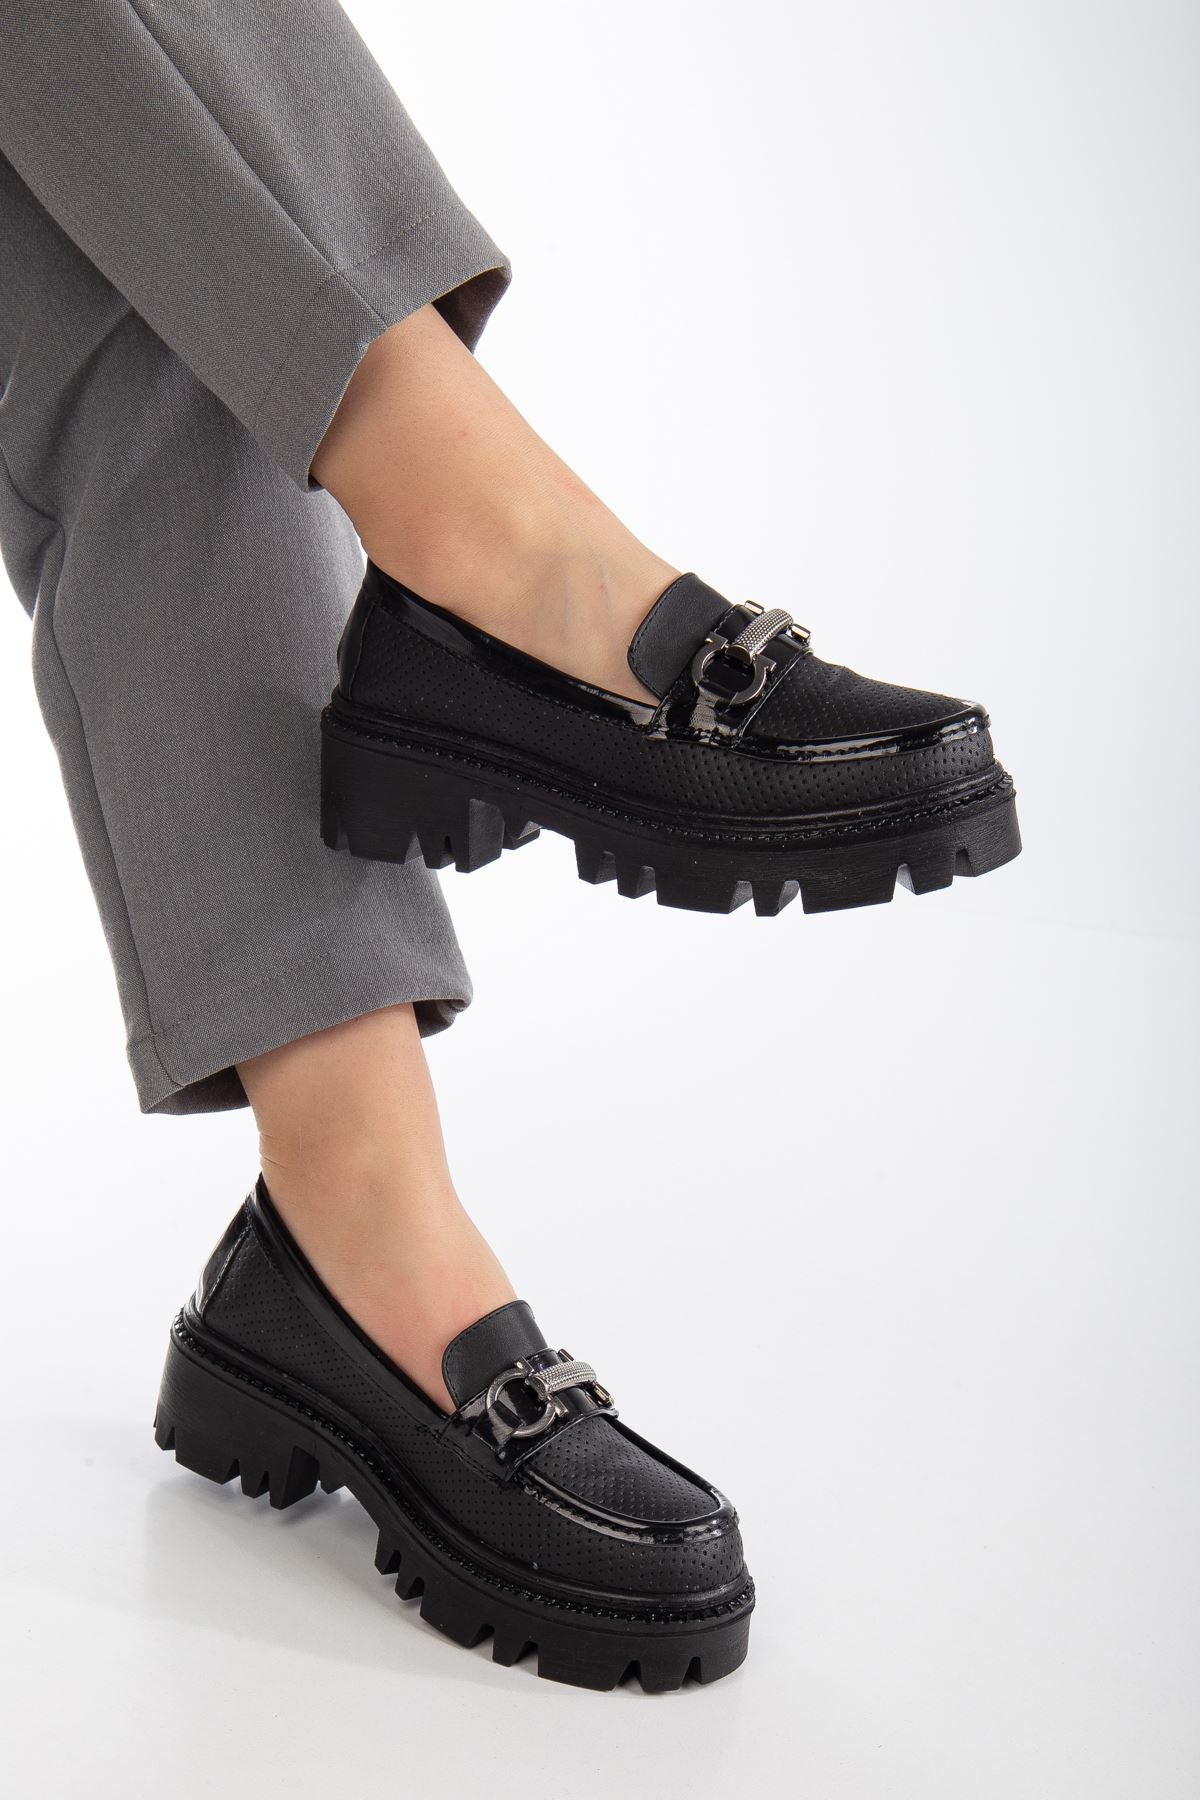 Women's Black Buckle Detailed Oxford Shoes - STREETMODE ™